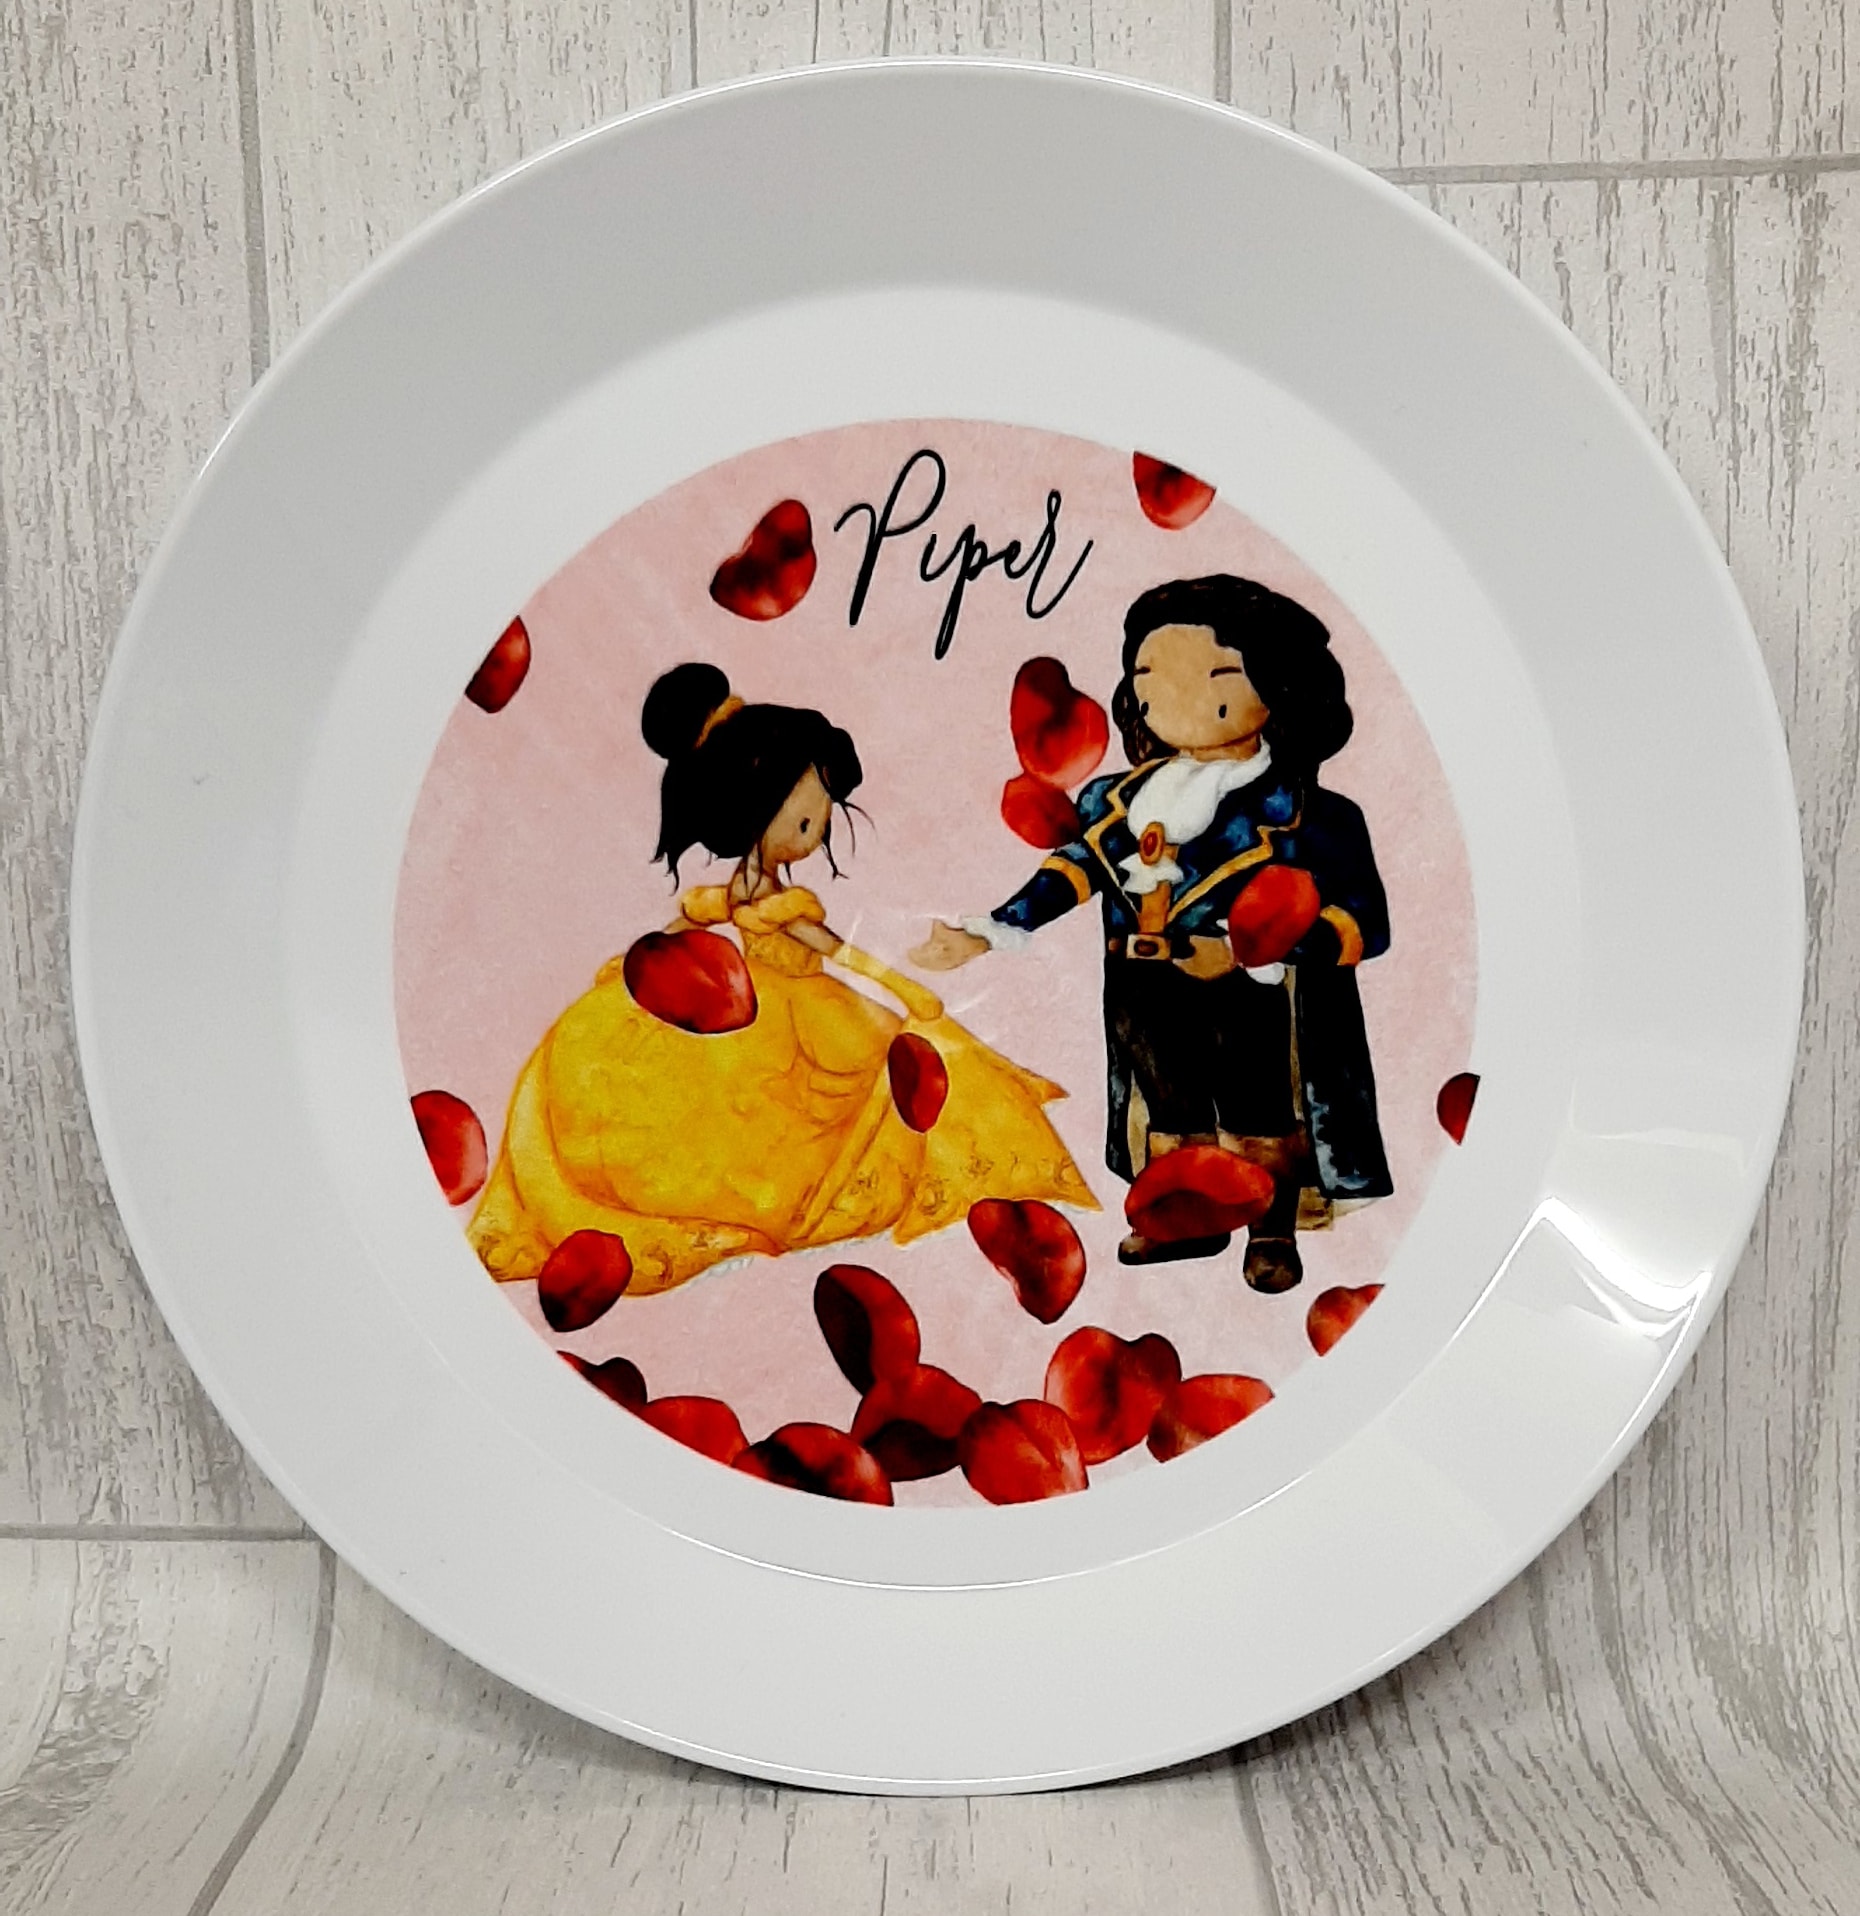 Children's Plastic Dinner Set with personalised plastic cutlery, plate and mini mug in Beauty and the Beast theme